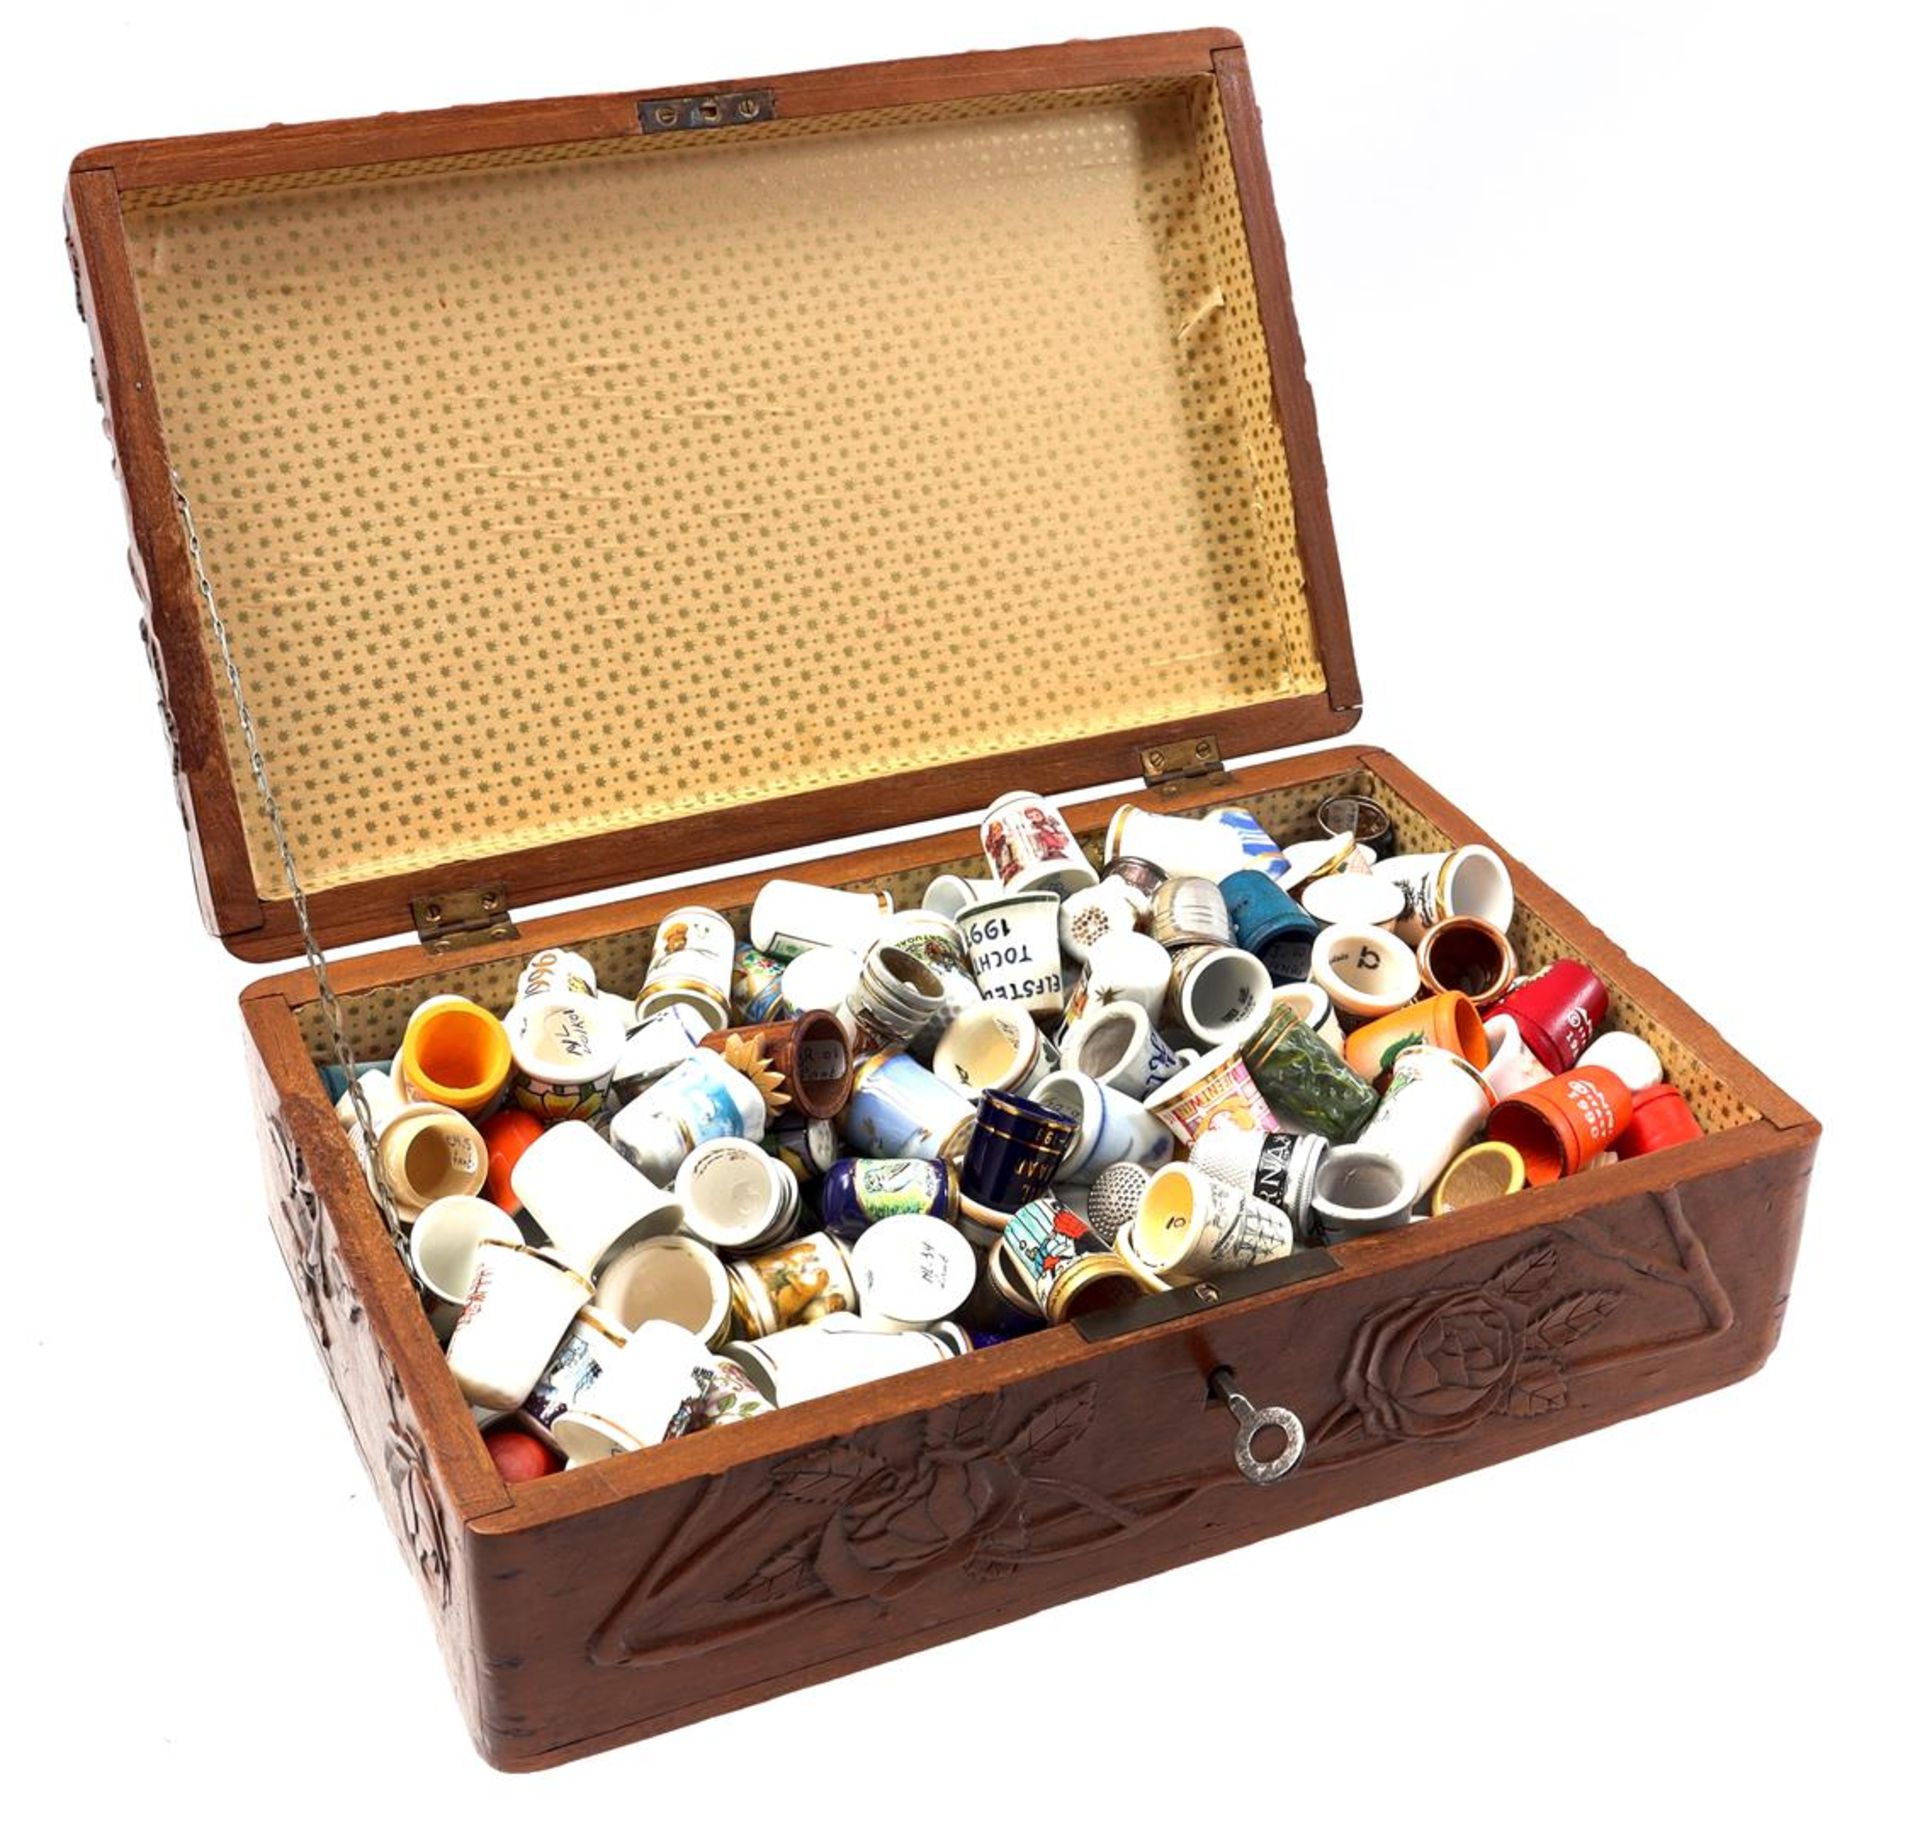 Approx. 200 thimbles